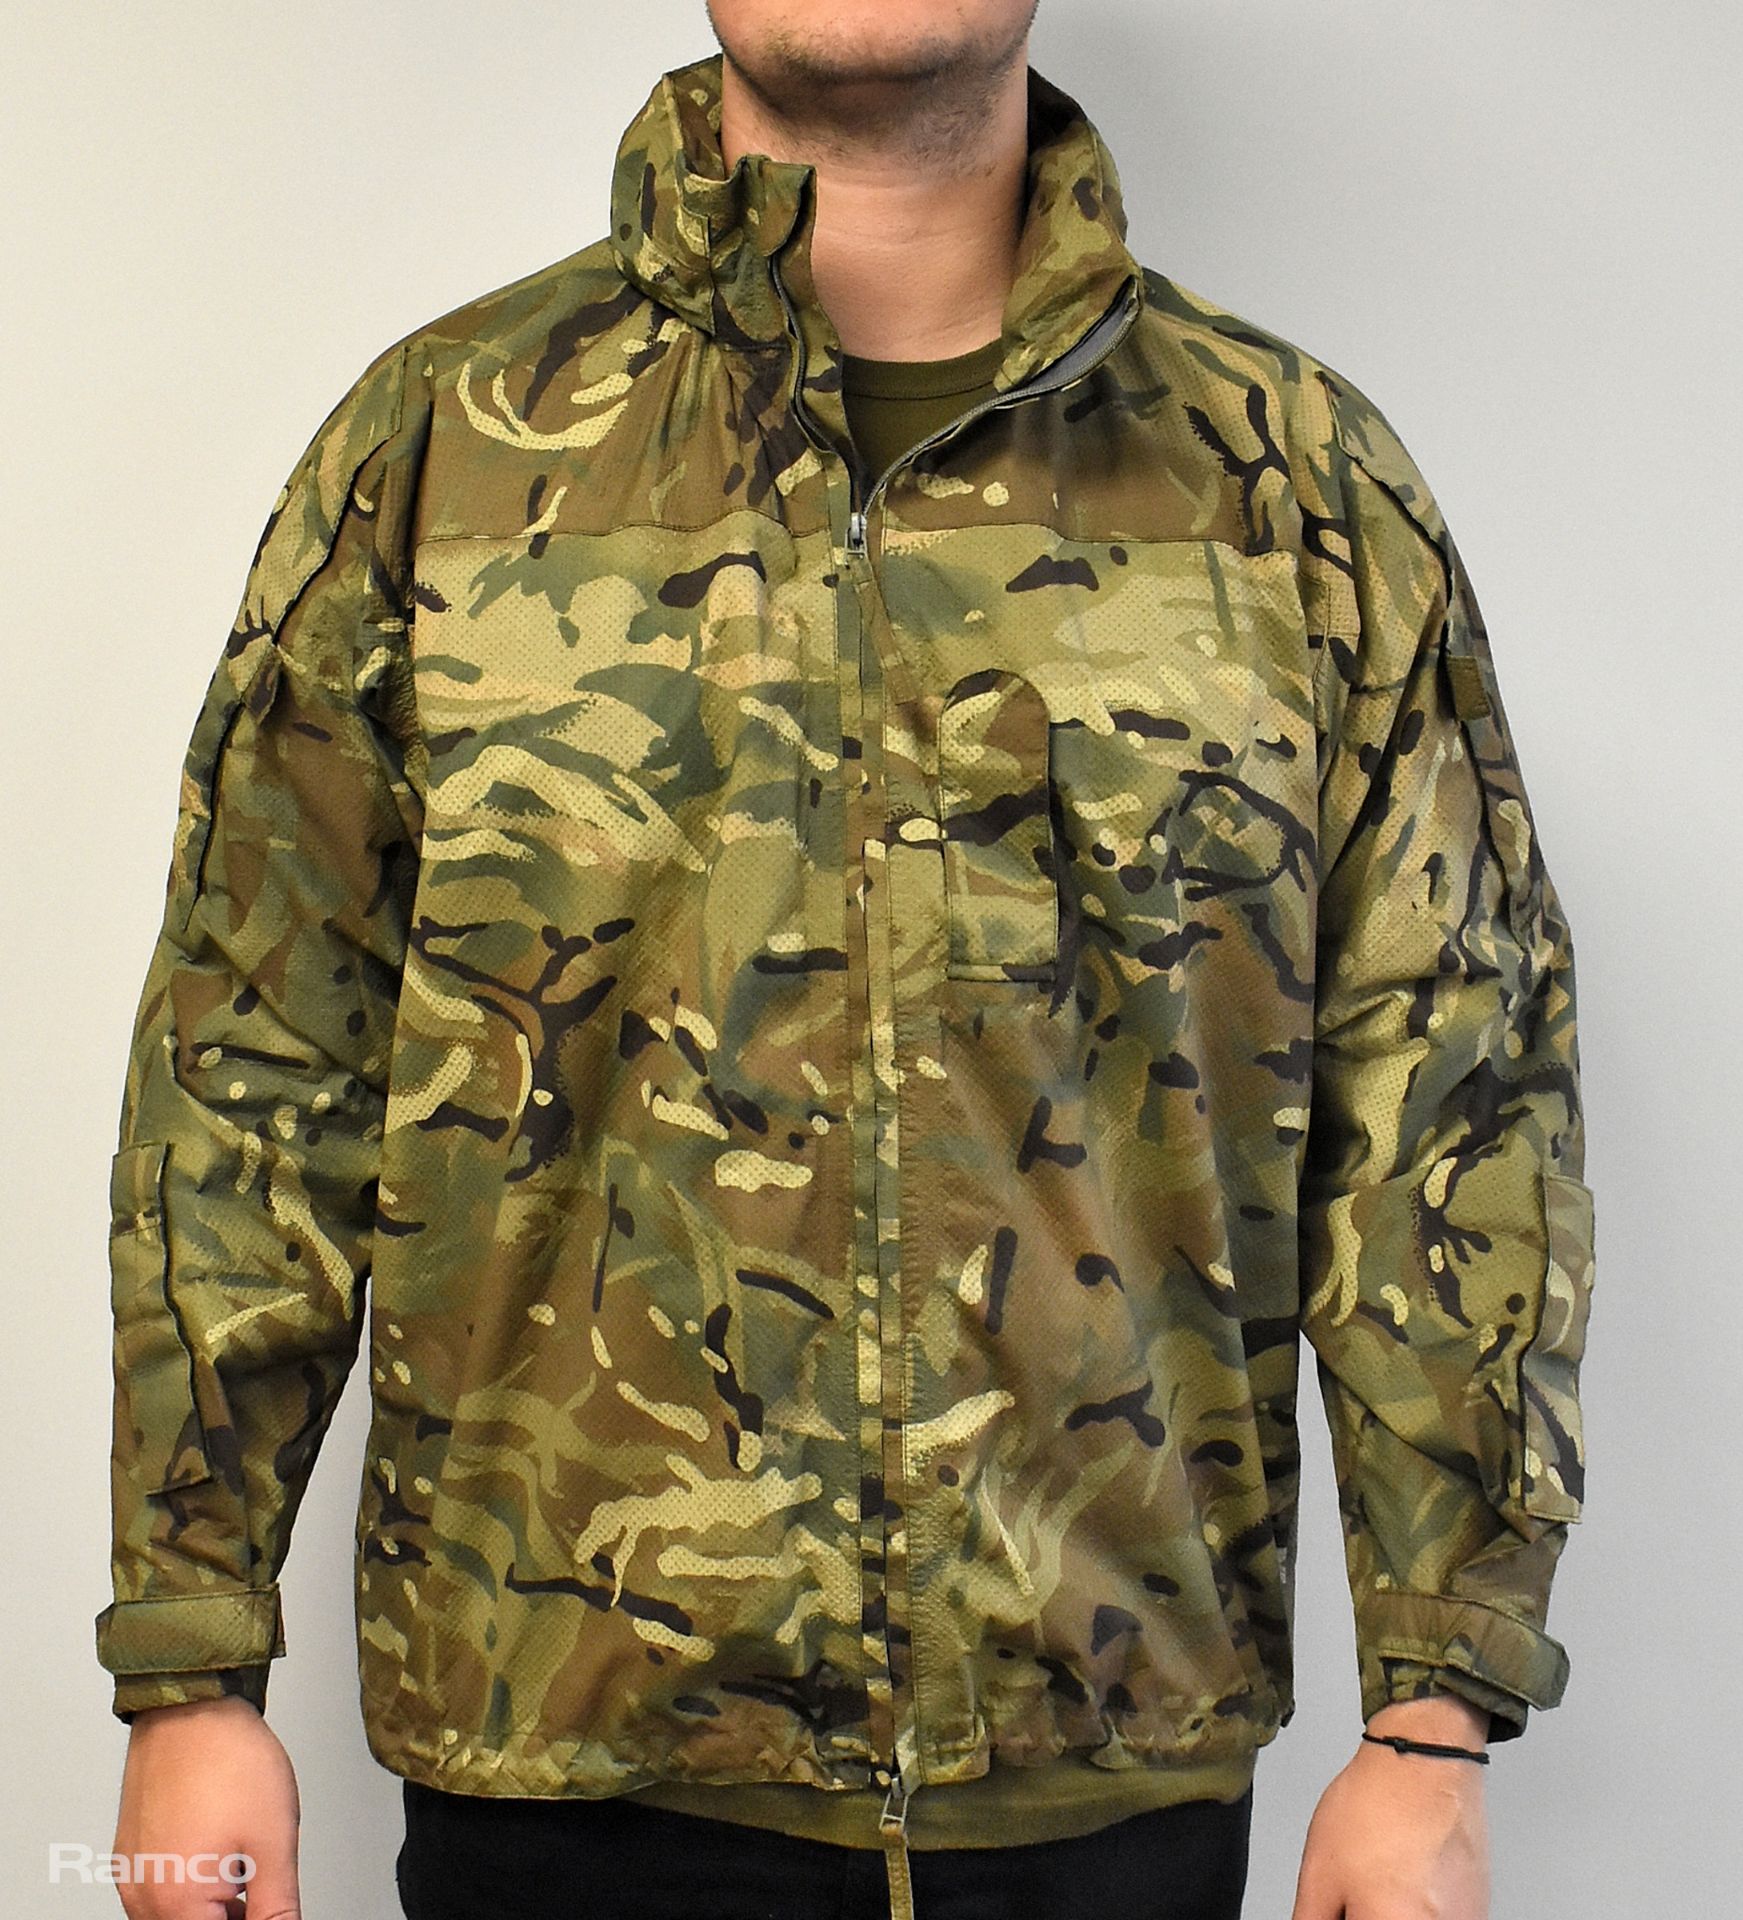 80x British Army MTP waterproof lightweight jackets - mixed grades and sizes